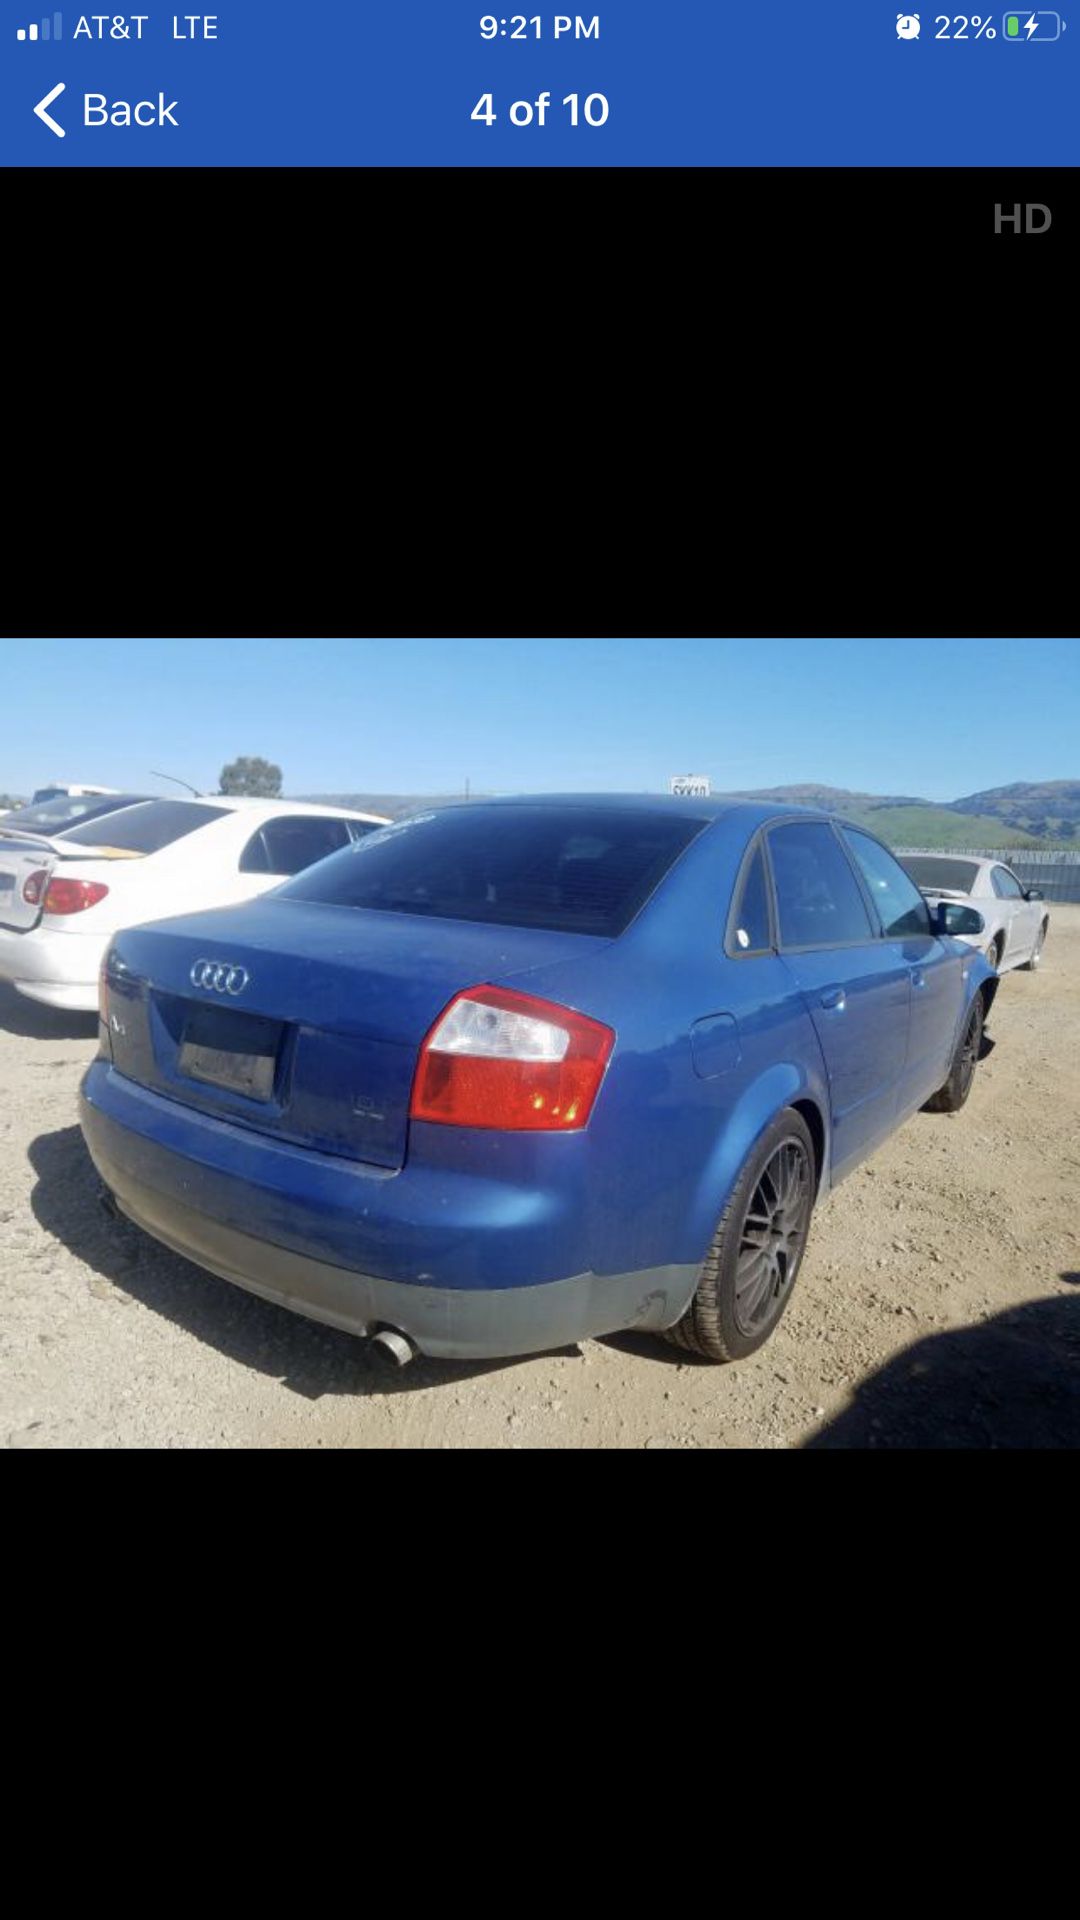 2004 audi A4. Manual 6speed. Parts only 235-40-R18